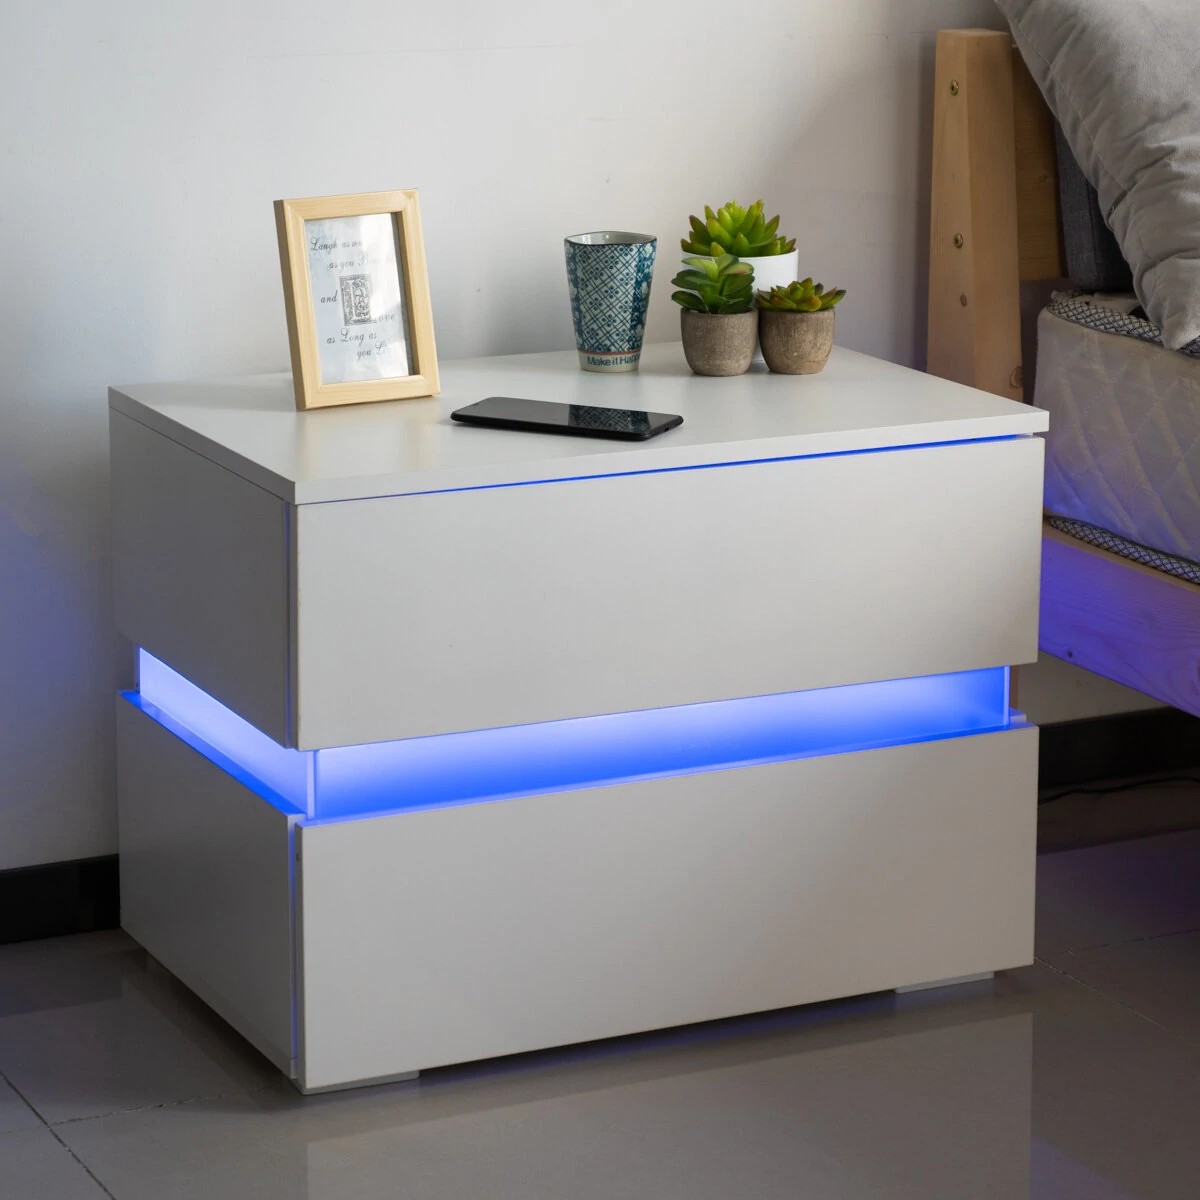 Woodyhome 60*39*45cm High Gloss LED Light Nightstands w 2 Drawers Modern Bedside File Cabinet Holder Chest Table for Home Office